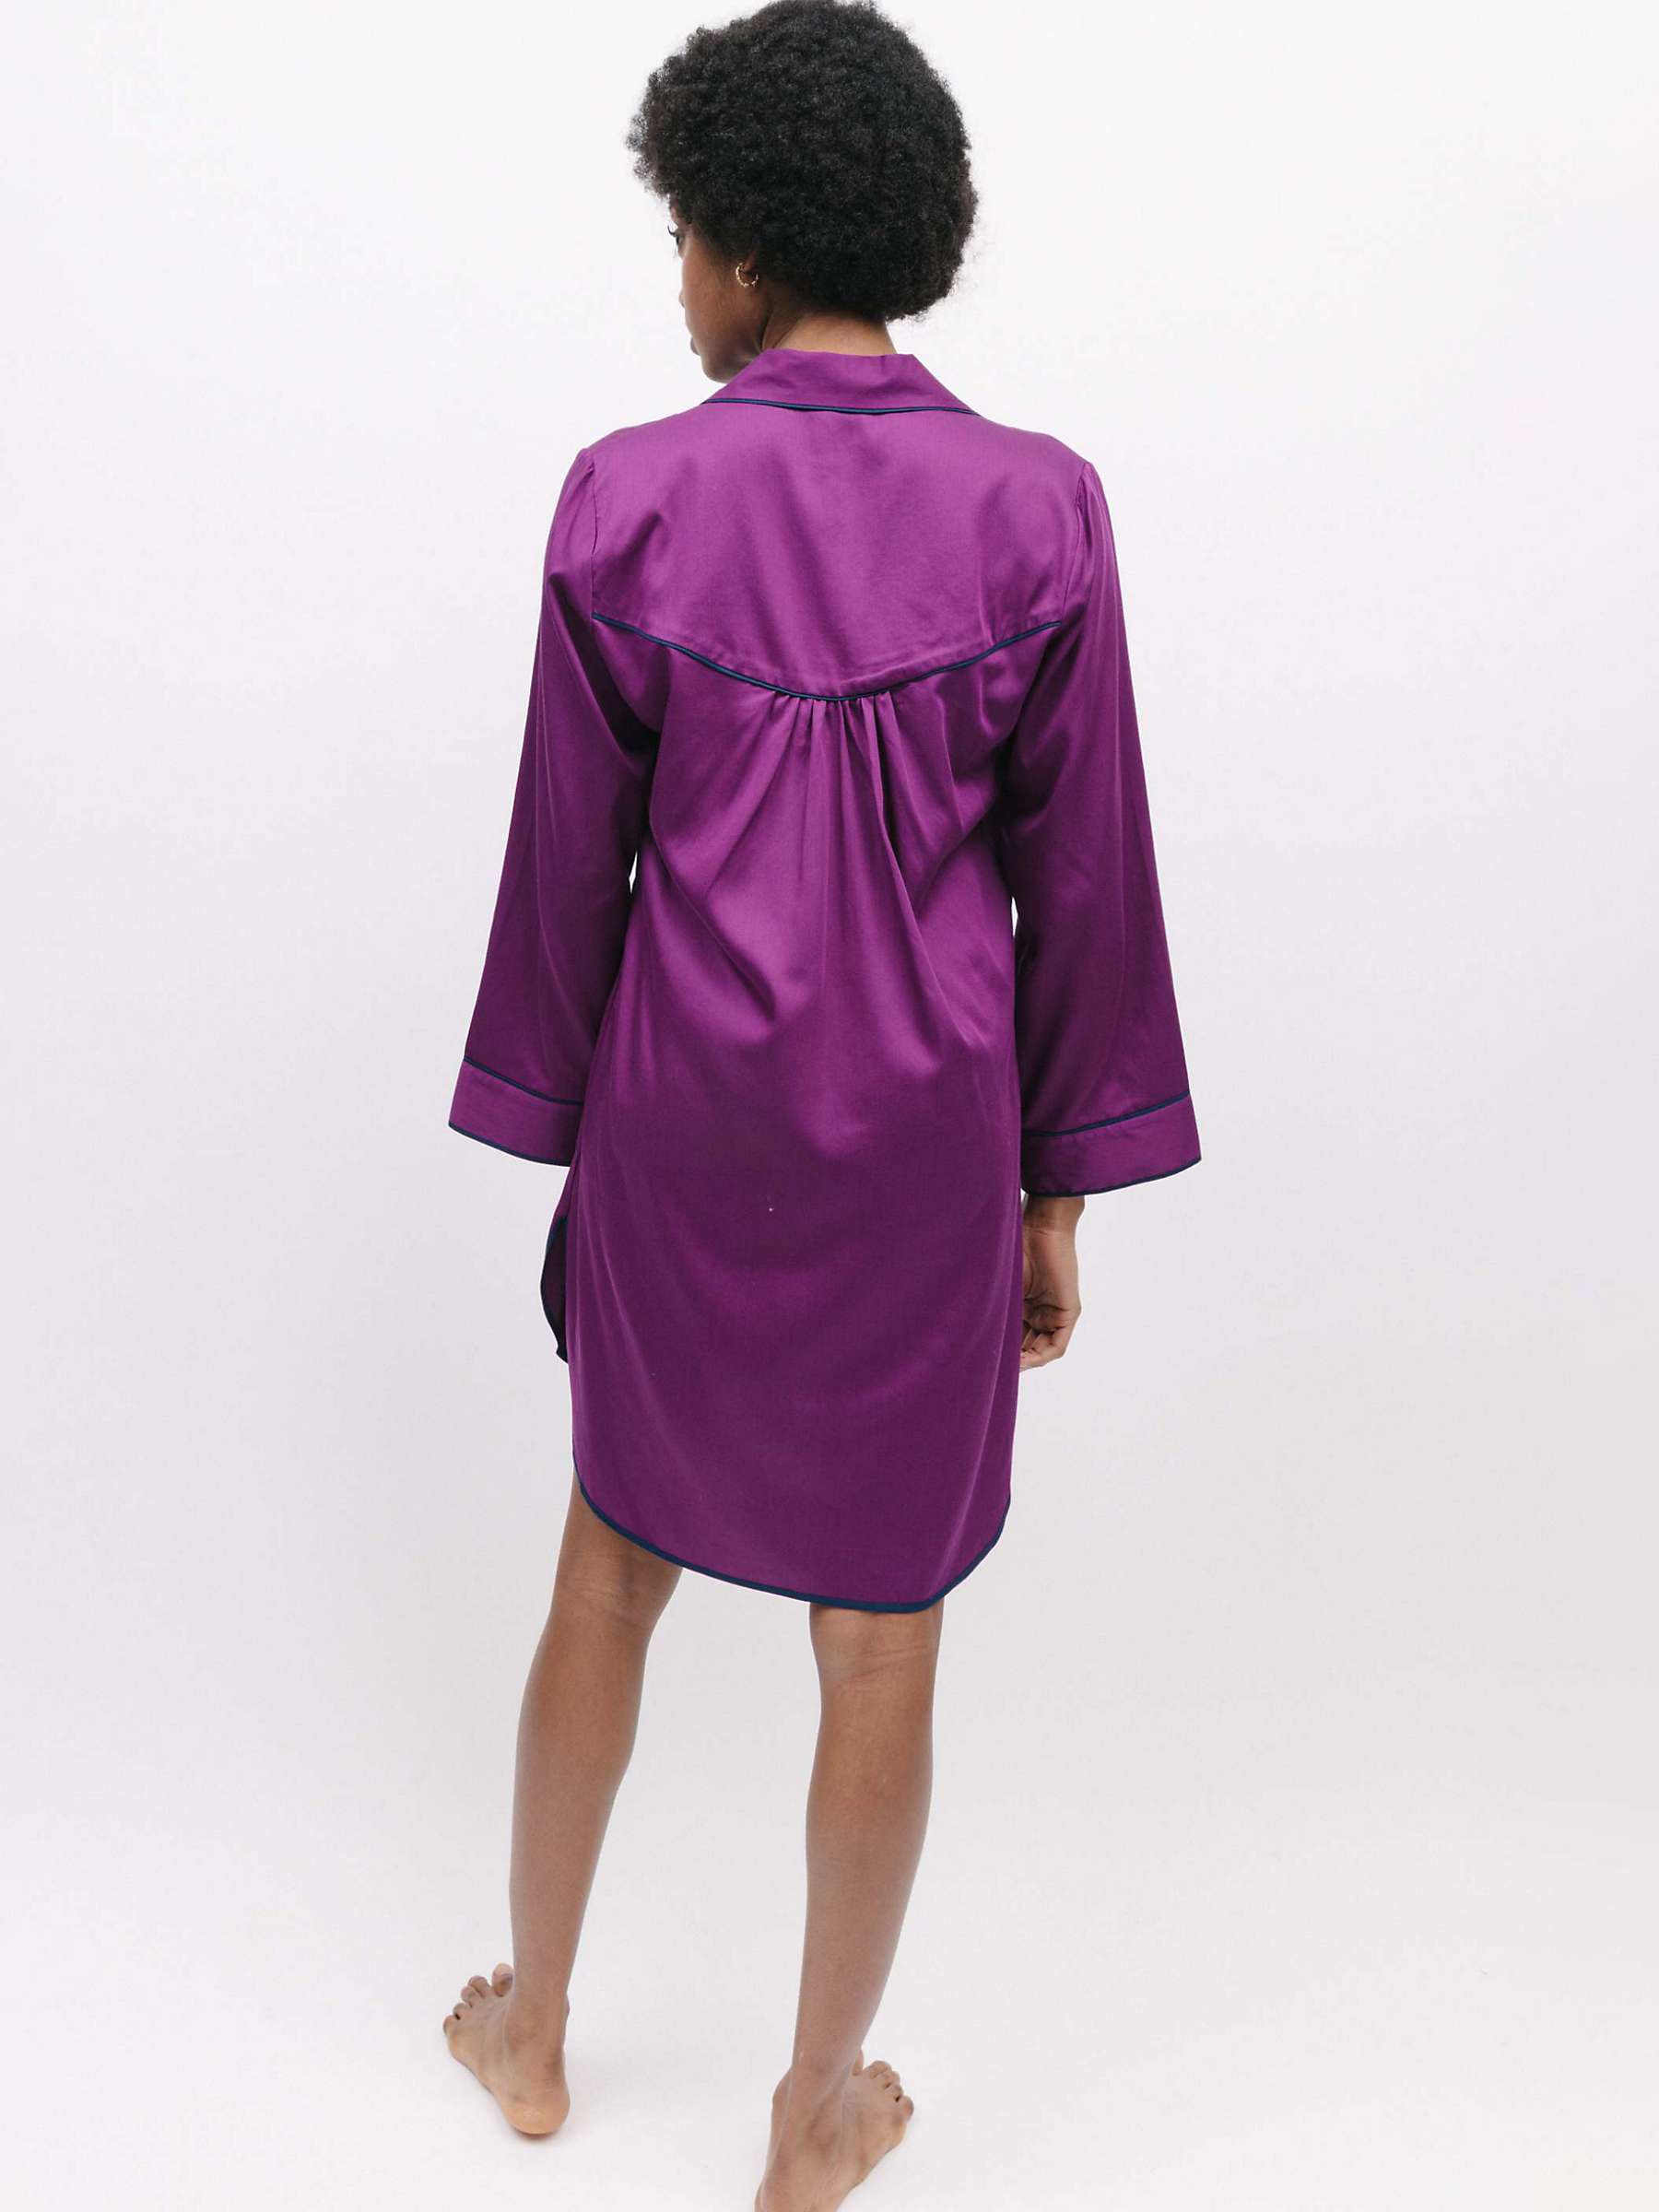 Buy Fable & Eve Southbank Solid Long Sleeve Nightshirt, Magenta Online at johnlewis.com